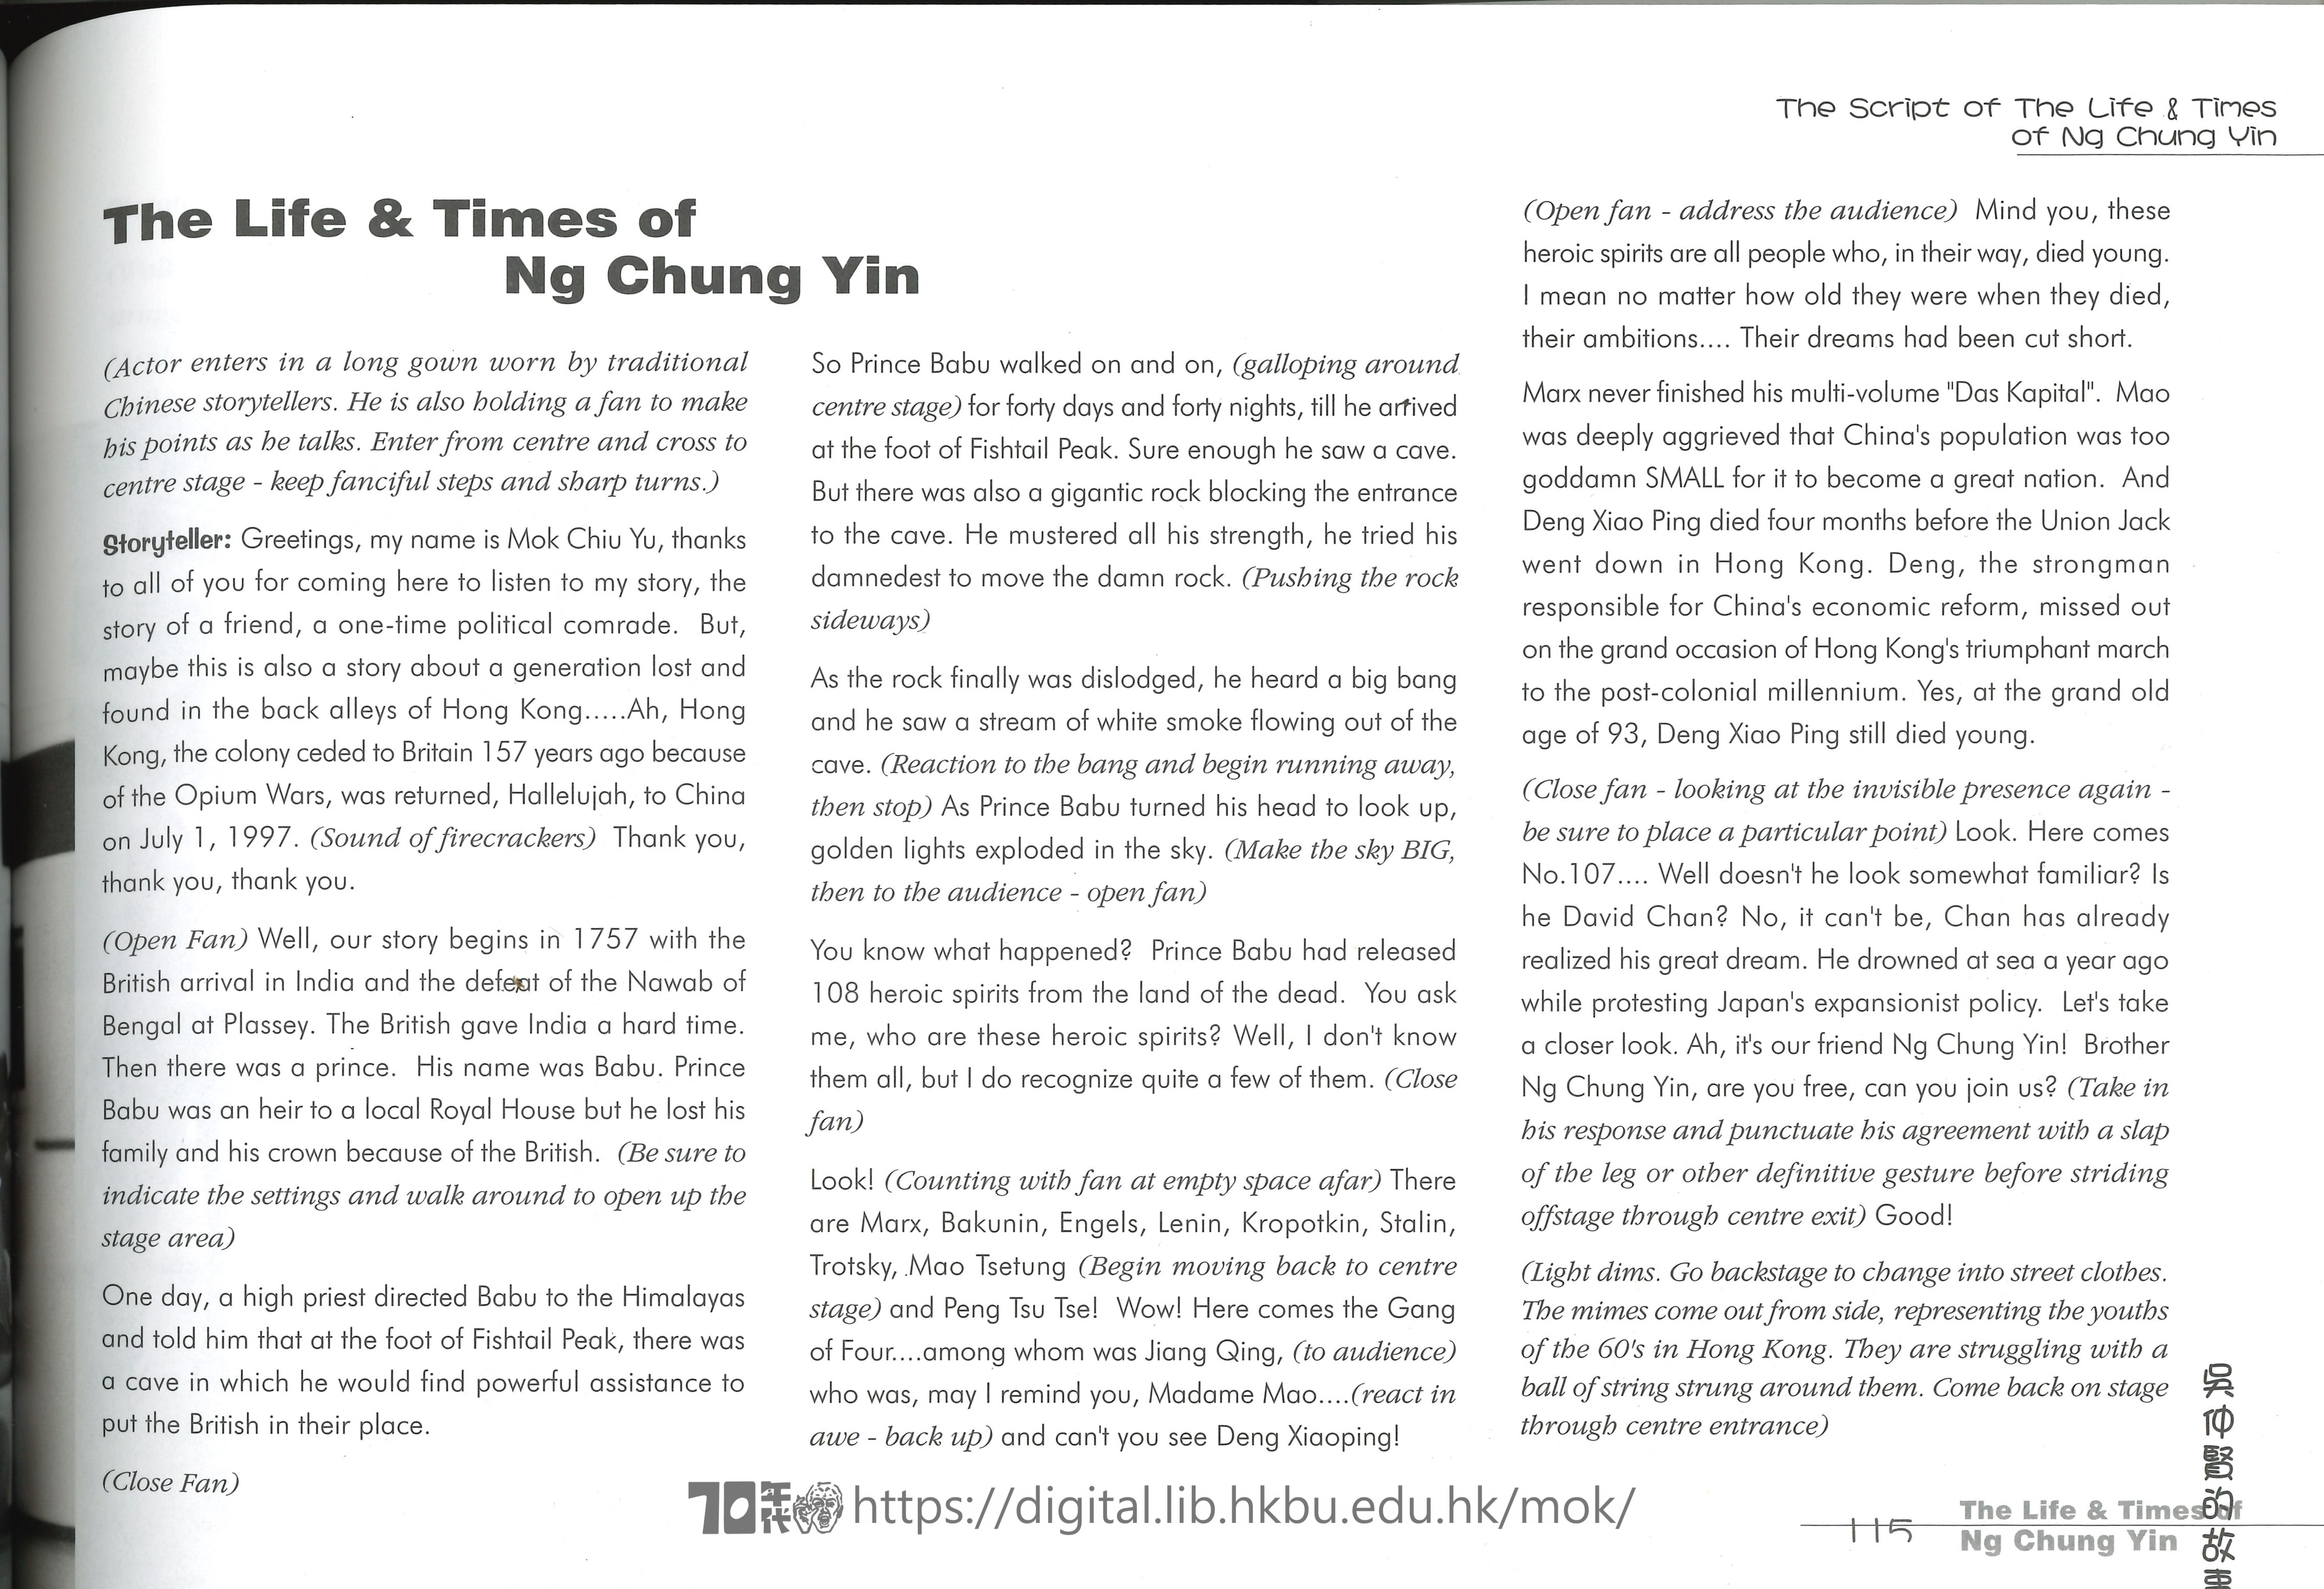 Big Wind  When Big Wind Blows - scripts collection (Big Wind, Yours Most Obediently, The Story of Ng Chung Yin, Macau 1 2 3)  